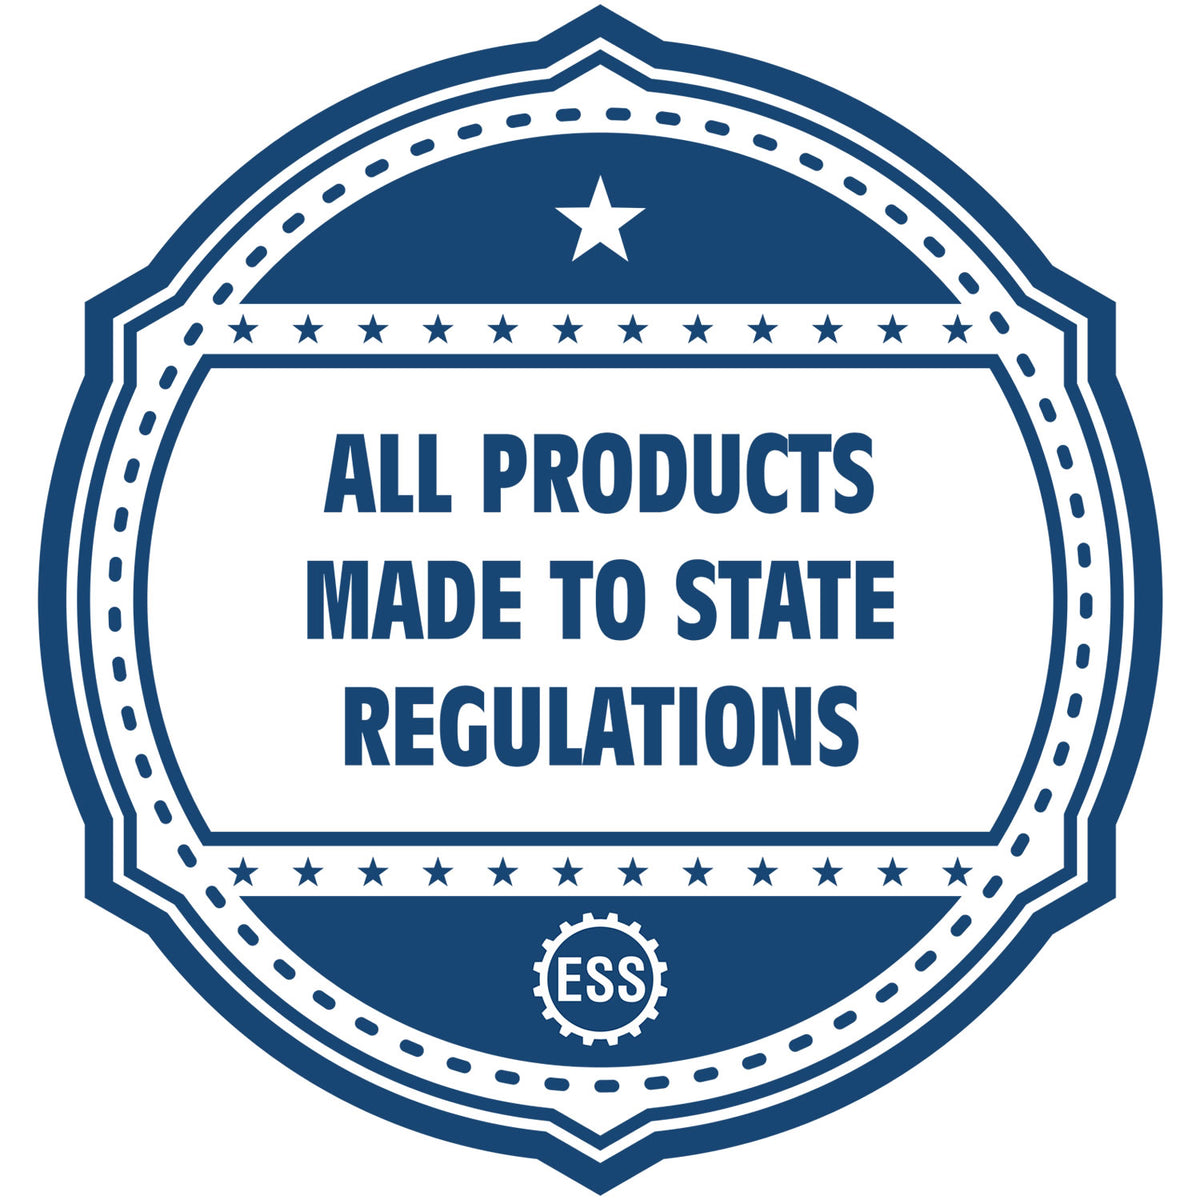 An icon or badge element for the Heavy-Duty Indiana Rectangular Notary Stamp showing that this product is made in compliance with state regulations.